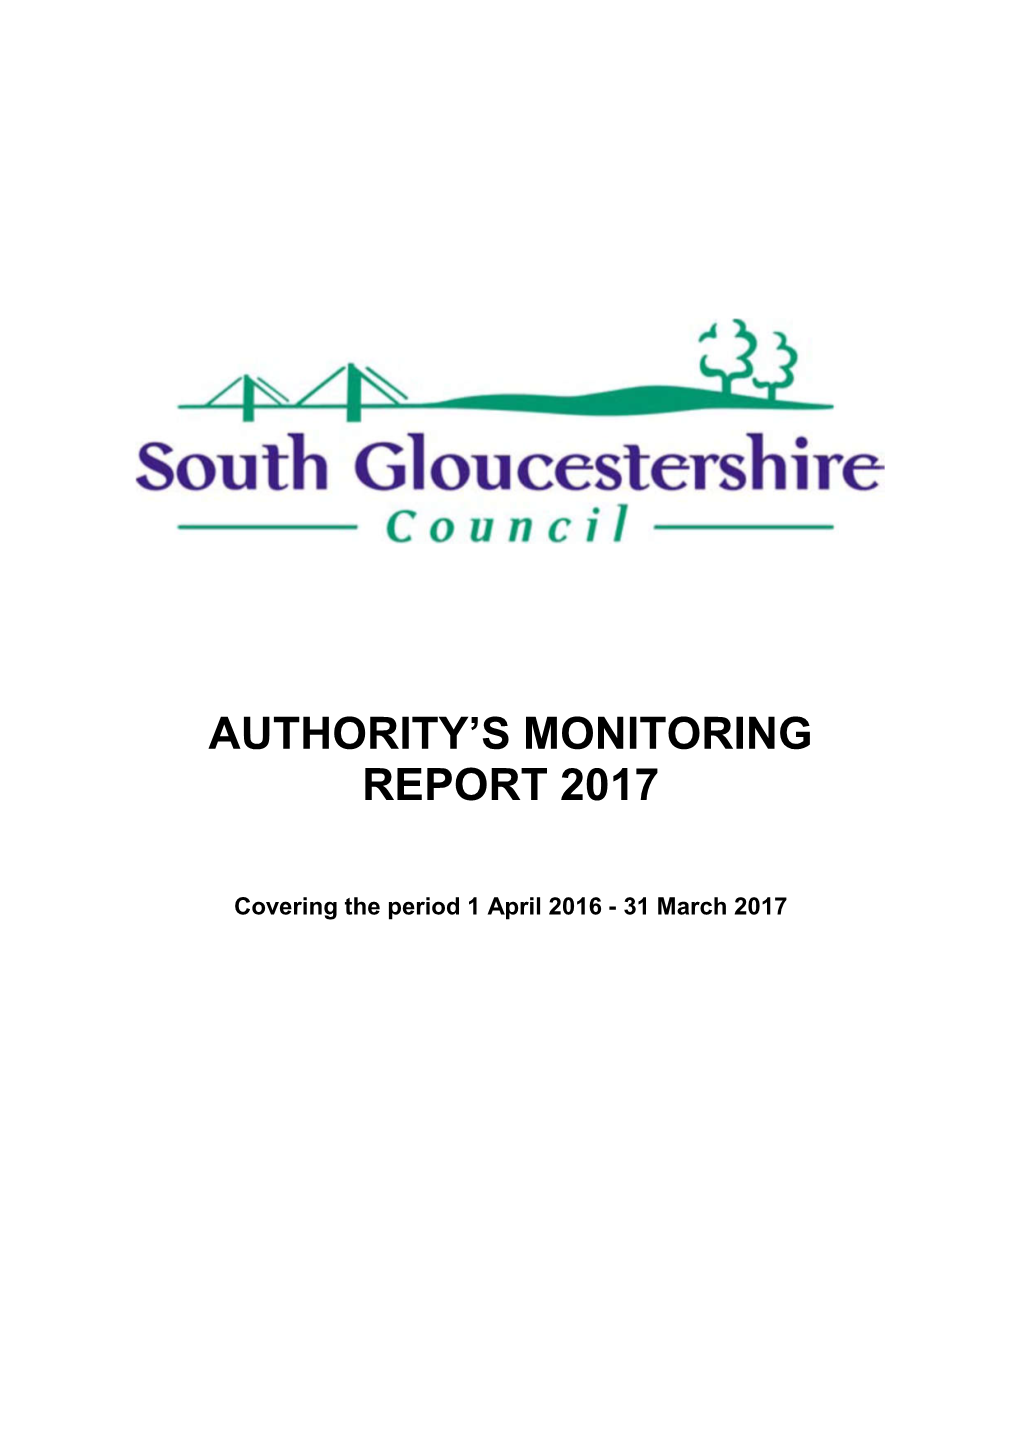 Authority's Monitoring Report 2017